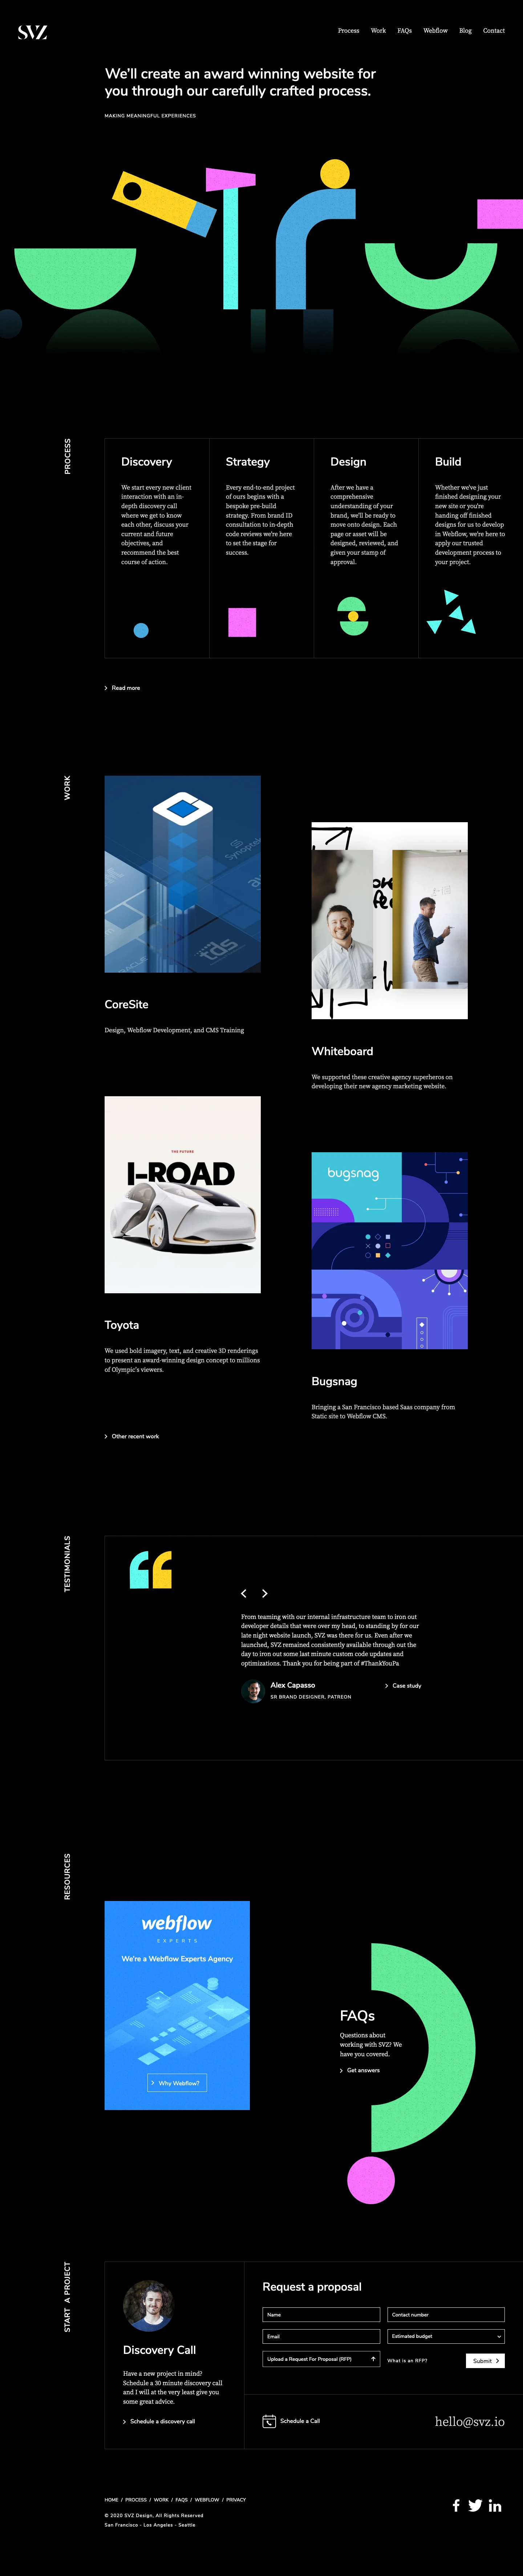 SVZ Design Landing Page Example: We use Webflow to design & develop high-end CMS enabled marketing websites from scratch. We work with small to large Saas, Tech, and Agencies that value creating meaningful digital experiences that convert.